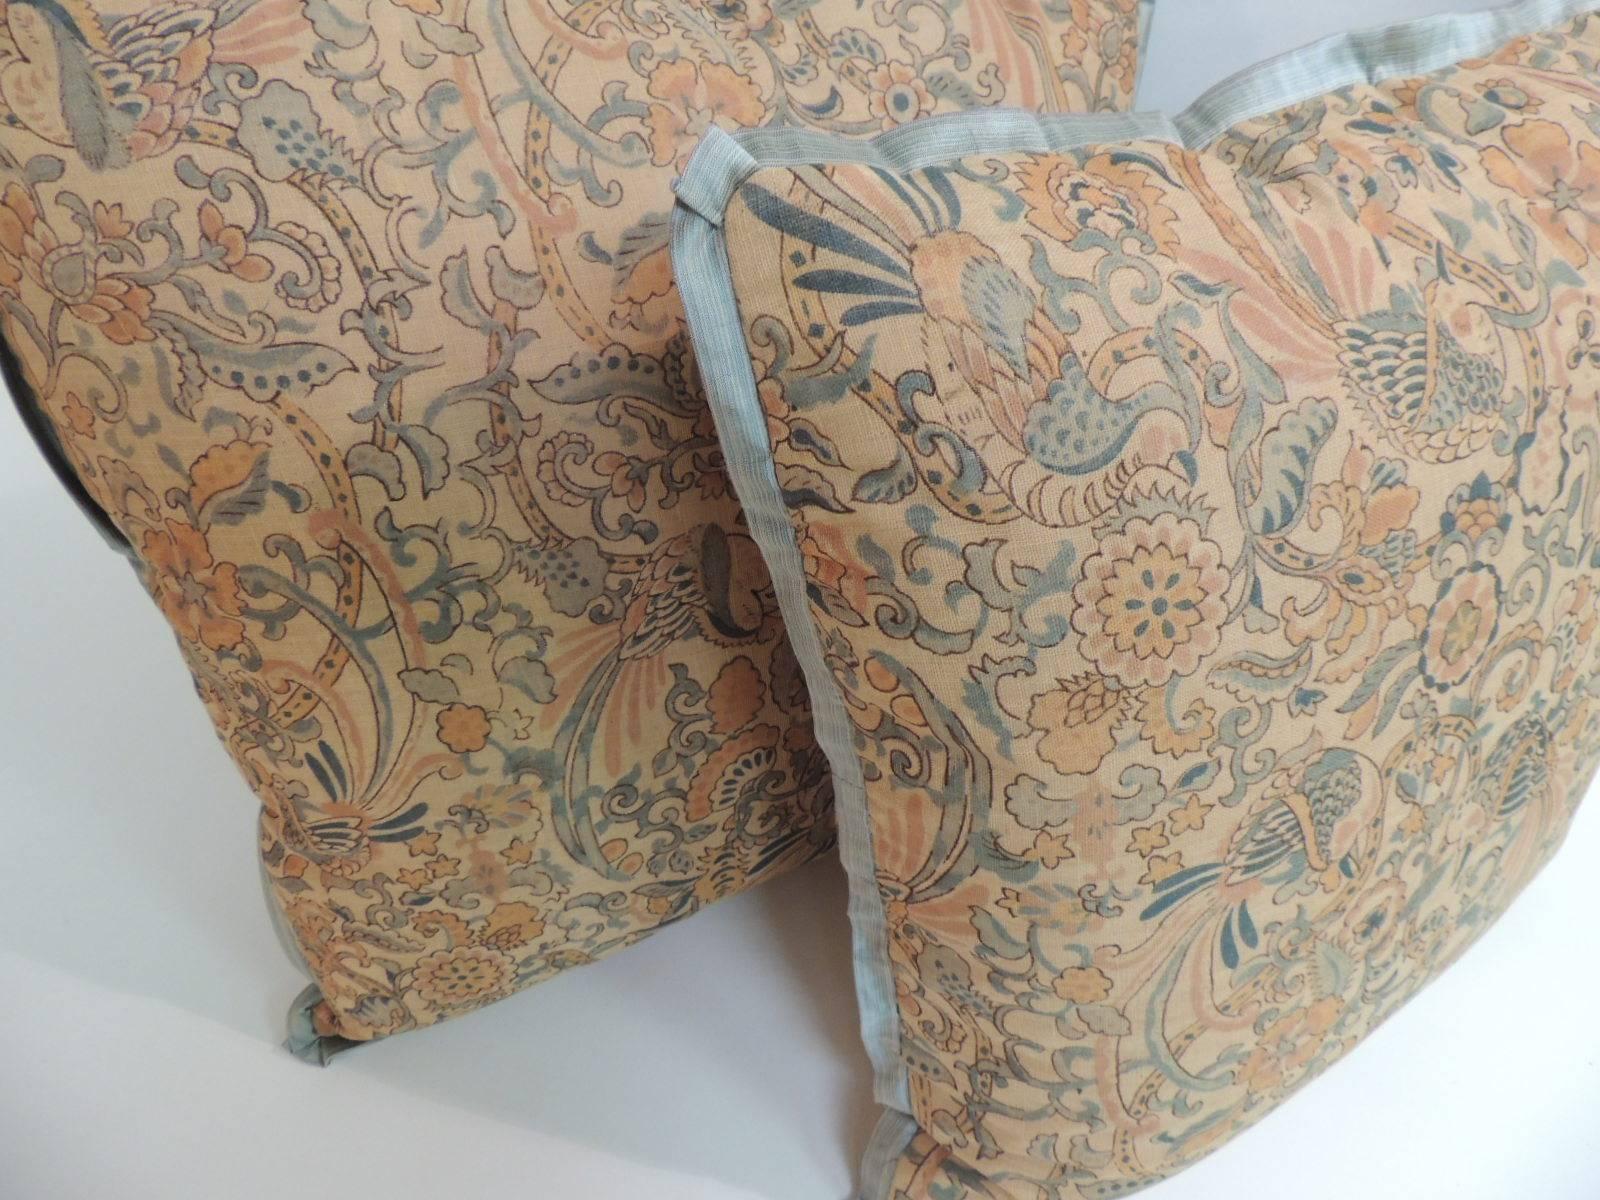 Hand-Crafted Pair of 19th Century Arts & Crafts English Printed Linen Decorative Pillows